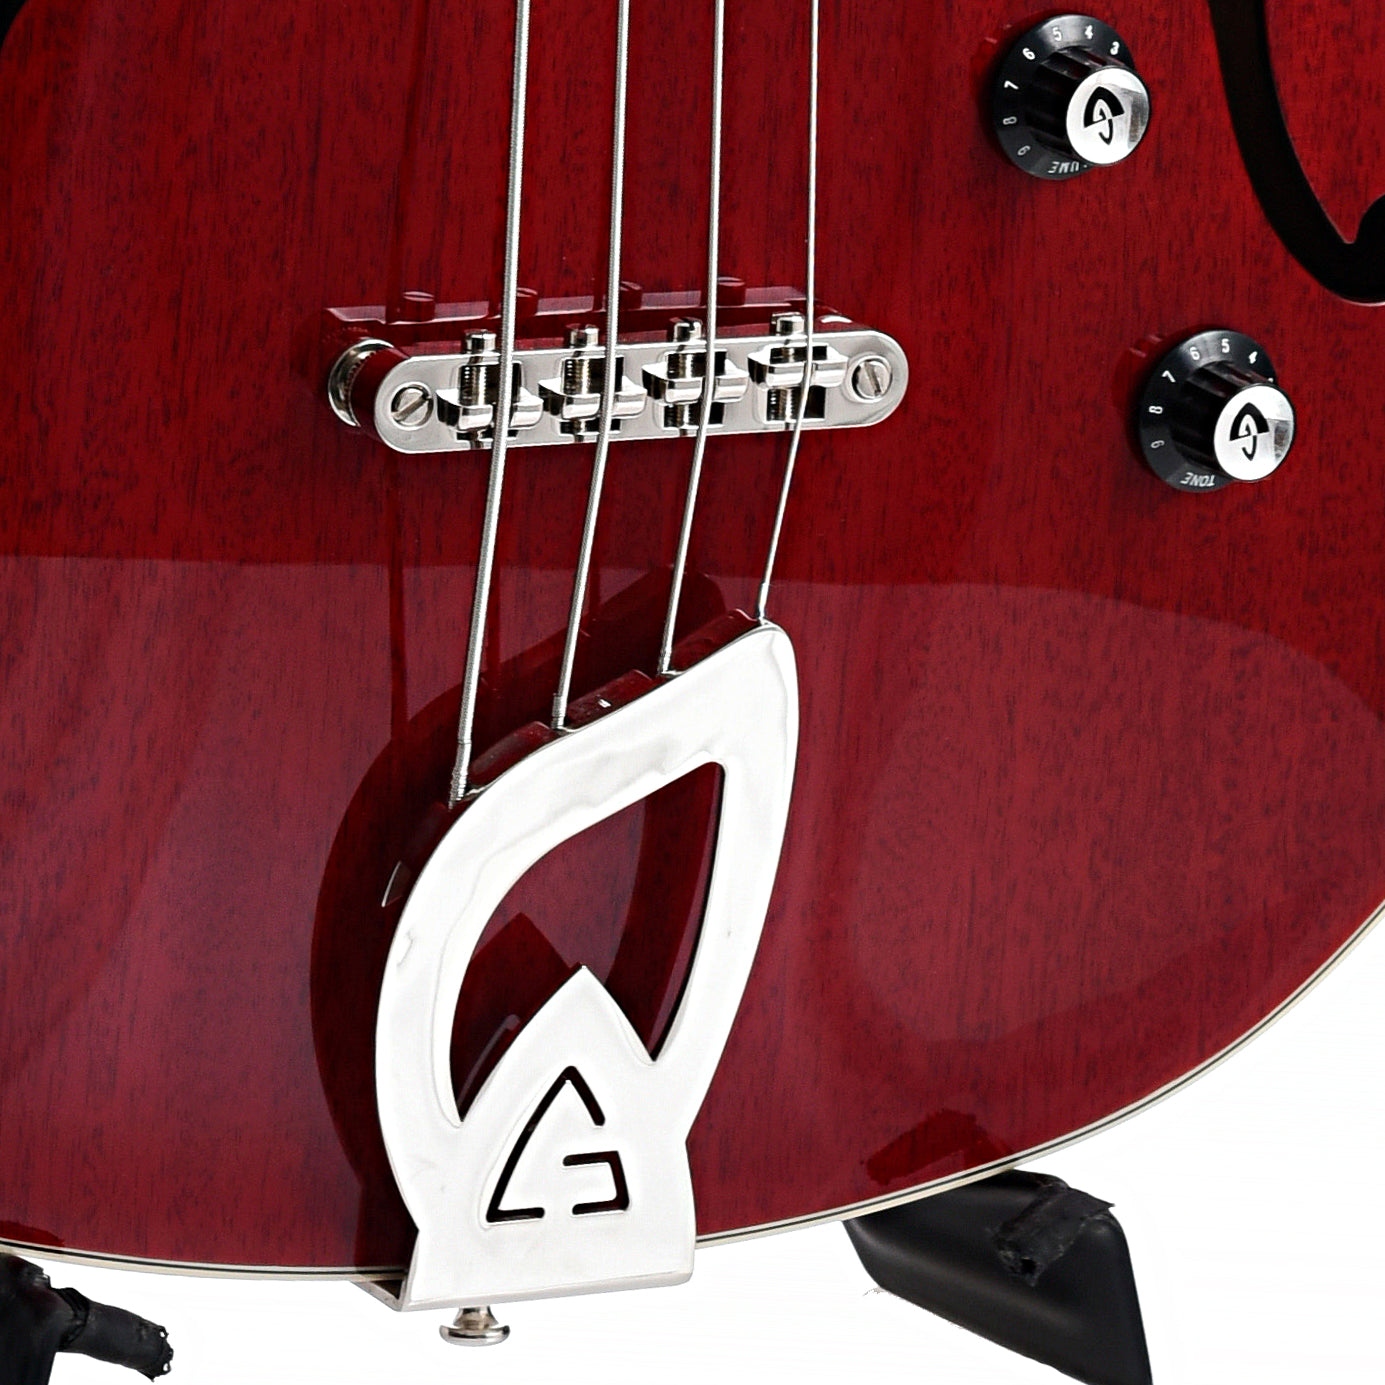 Image 3 of Guild Starfire 1 Bass, Cherry Red - SKU# GSF1BASS-CHR : Product Type Hollow Body Bass Guitars : Elderly Instruments